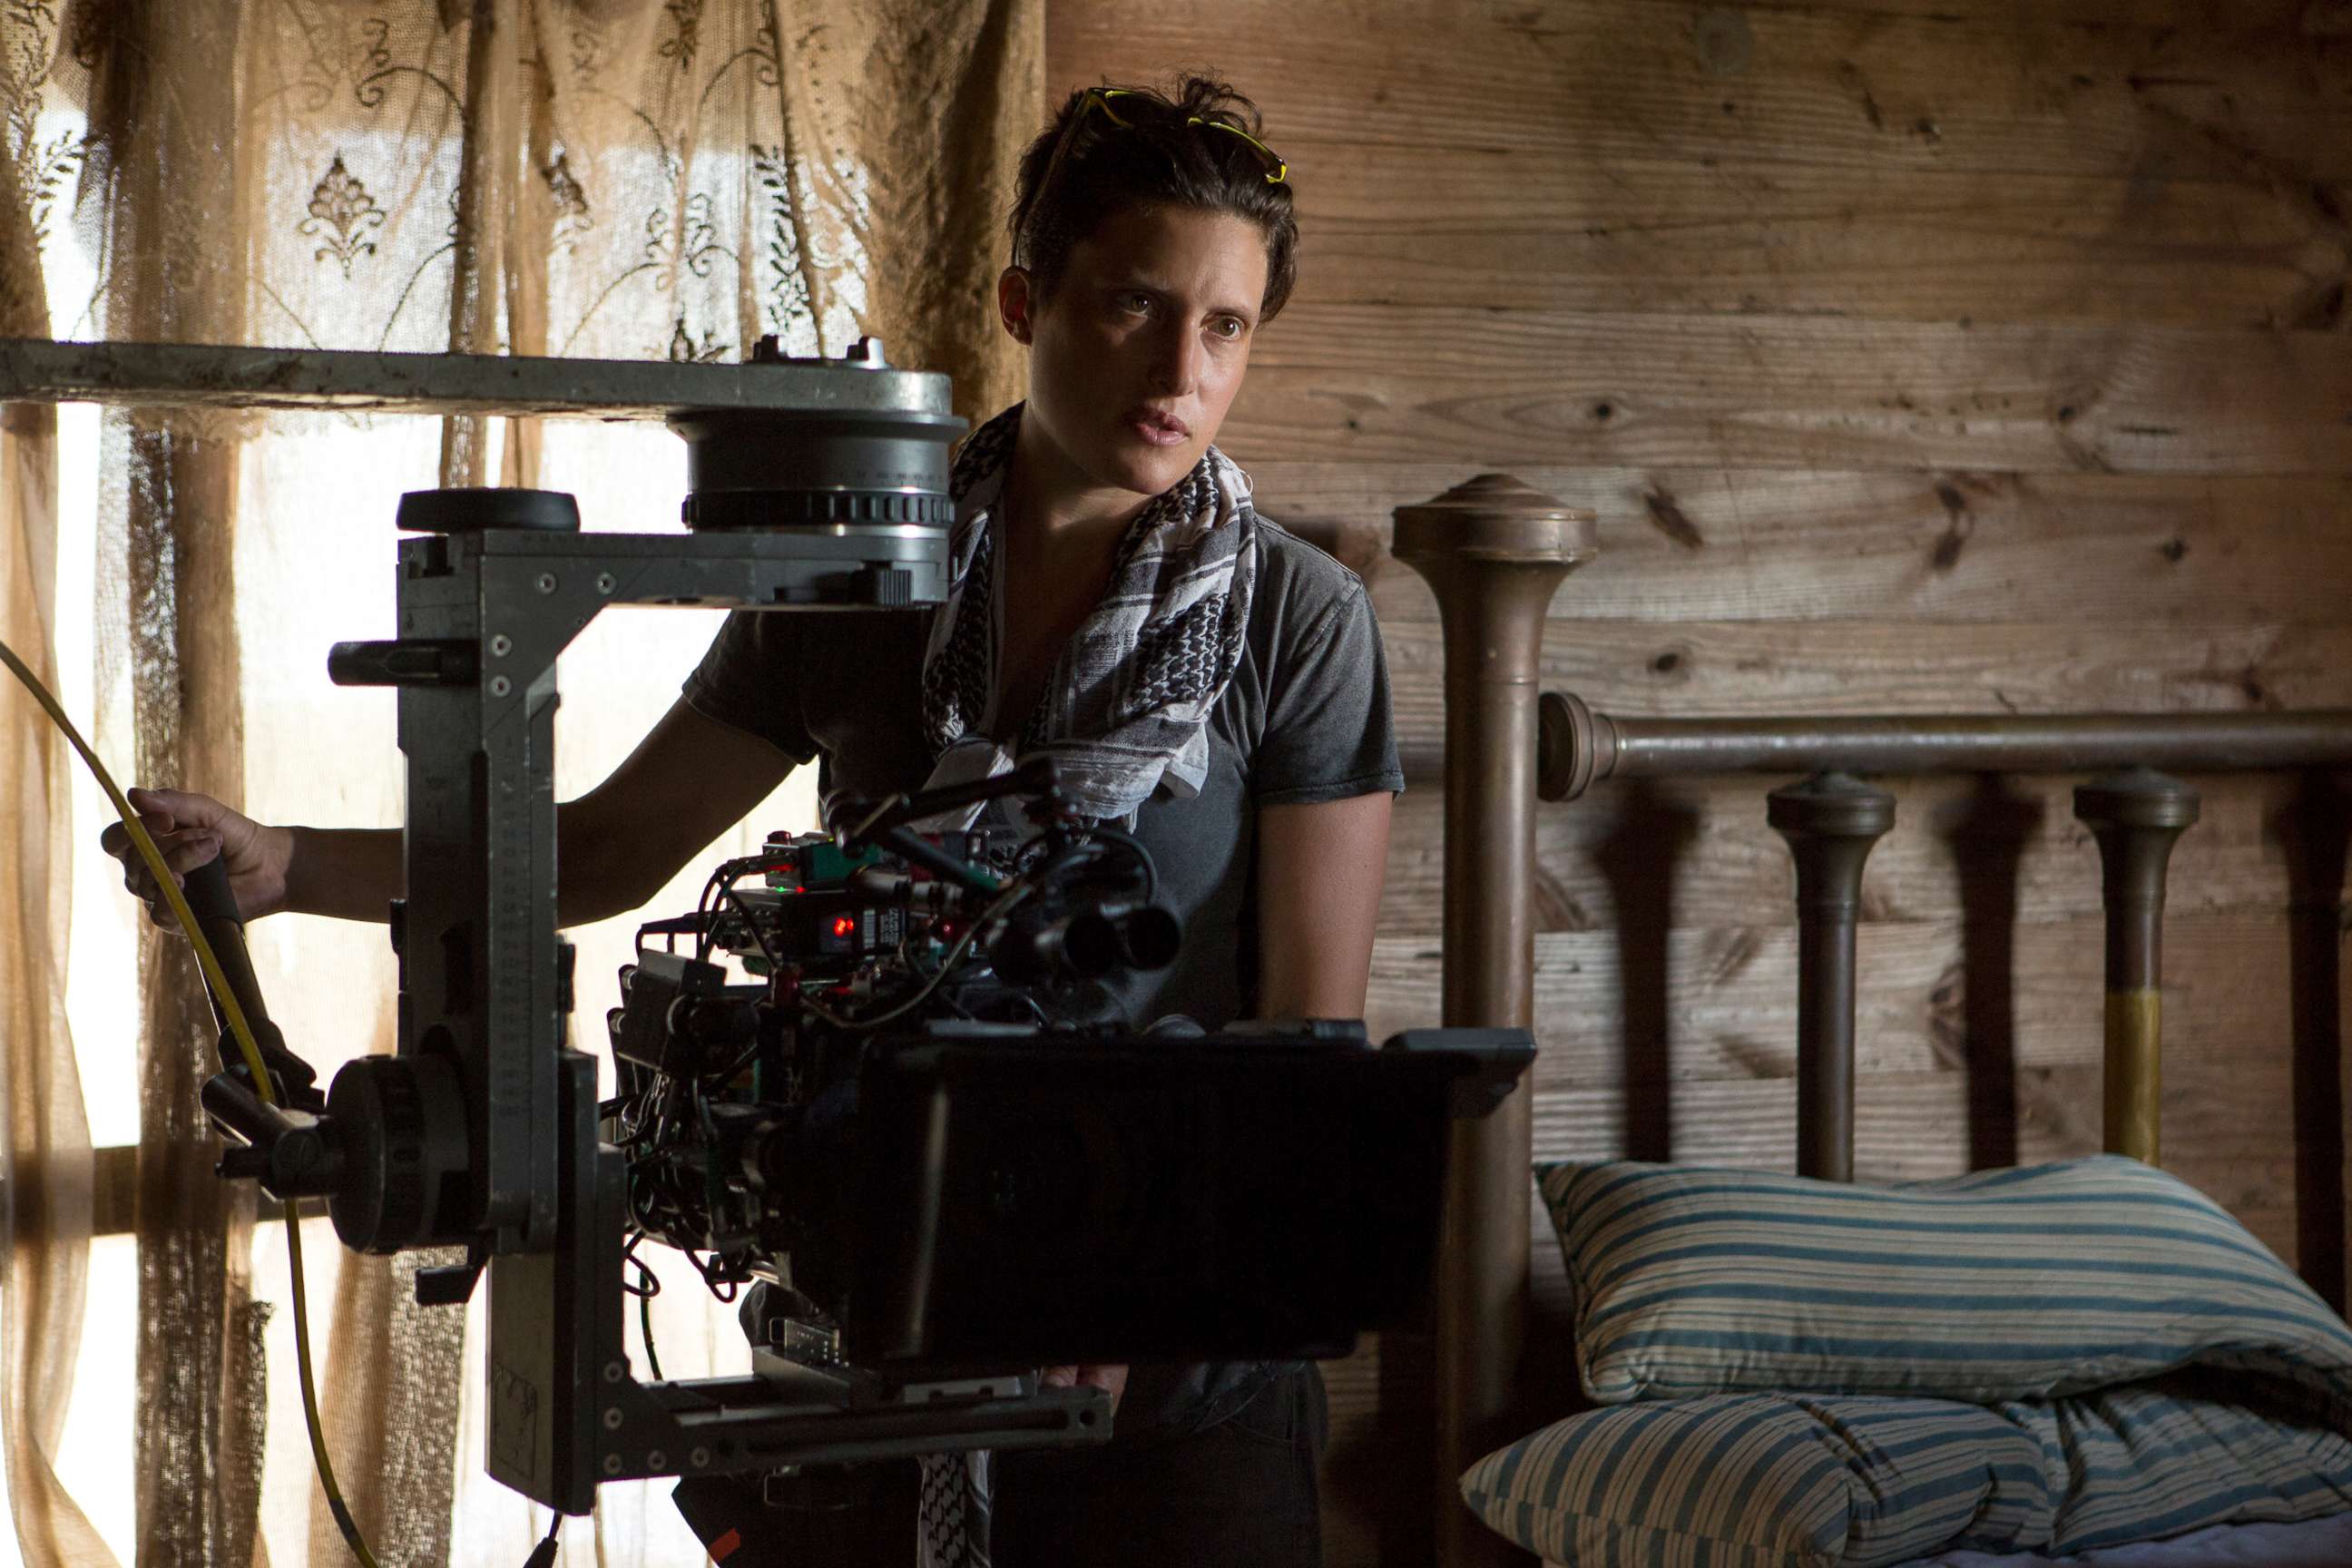 PHOTO: This image released by Netflix shows Rachel Morrison on the set of the film "Mudbound."